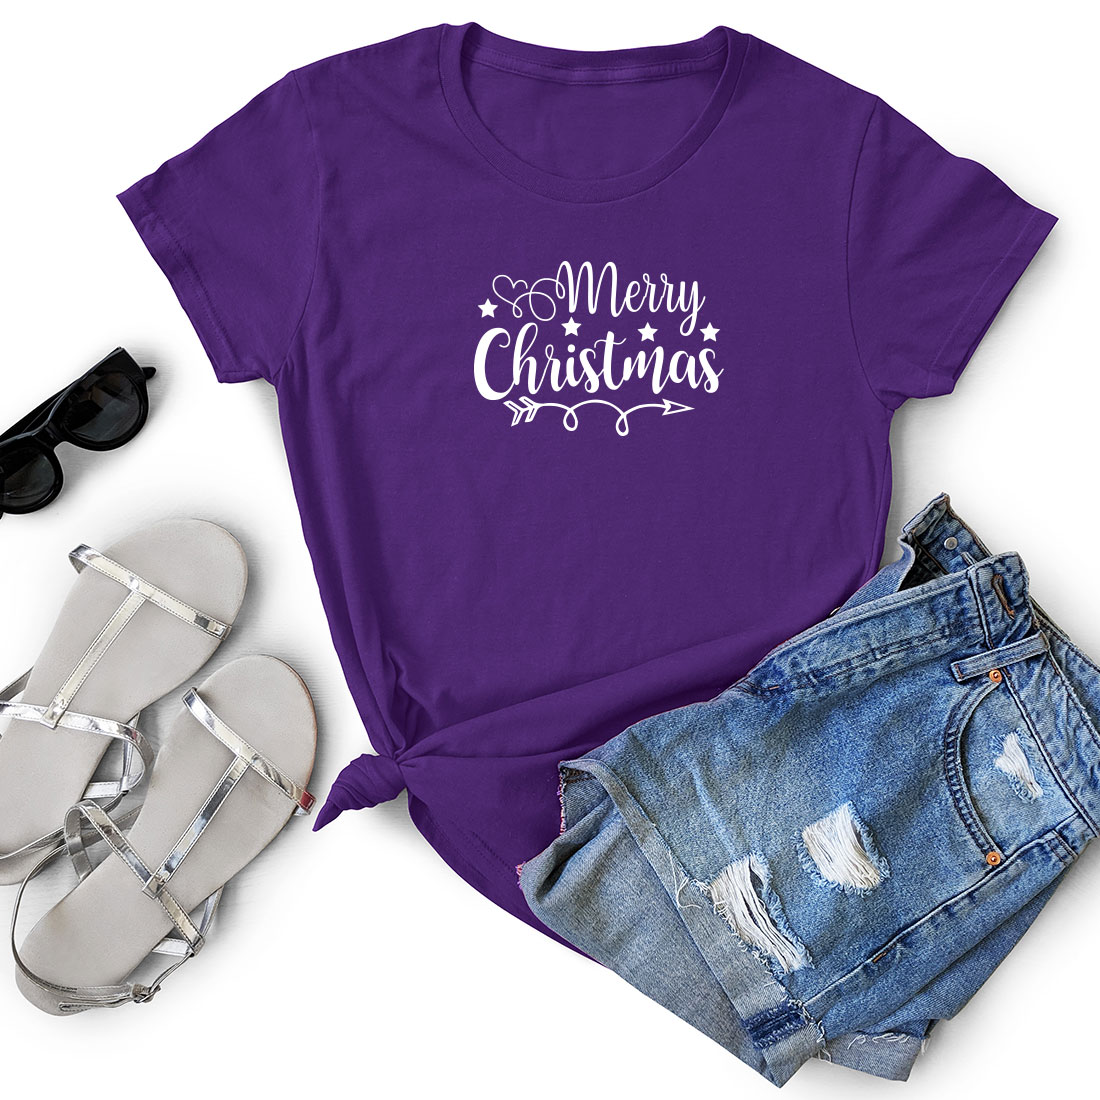 T - shirt that says merry christmas next to a pair of shorts.